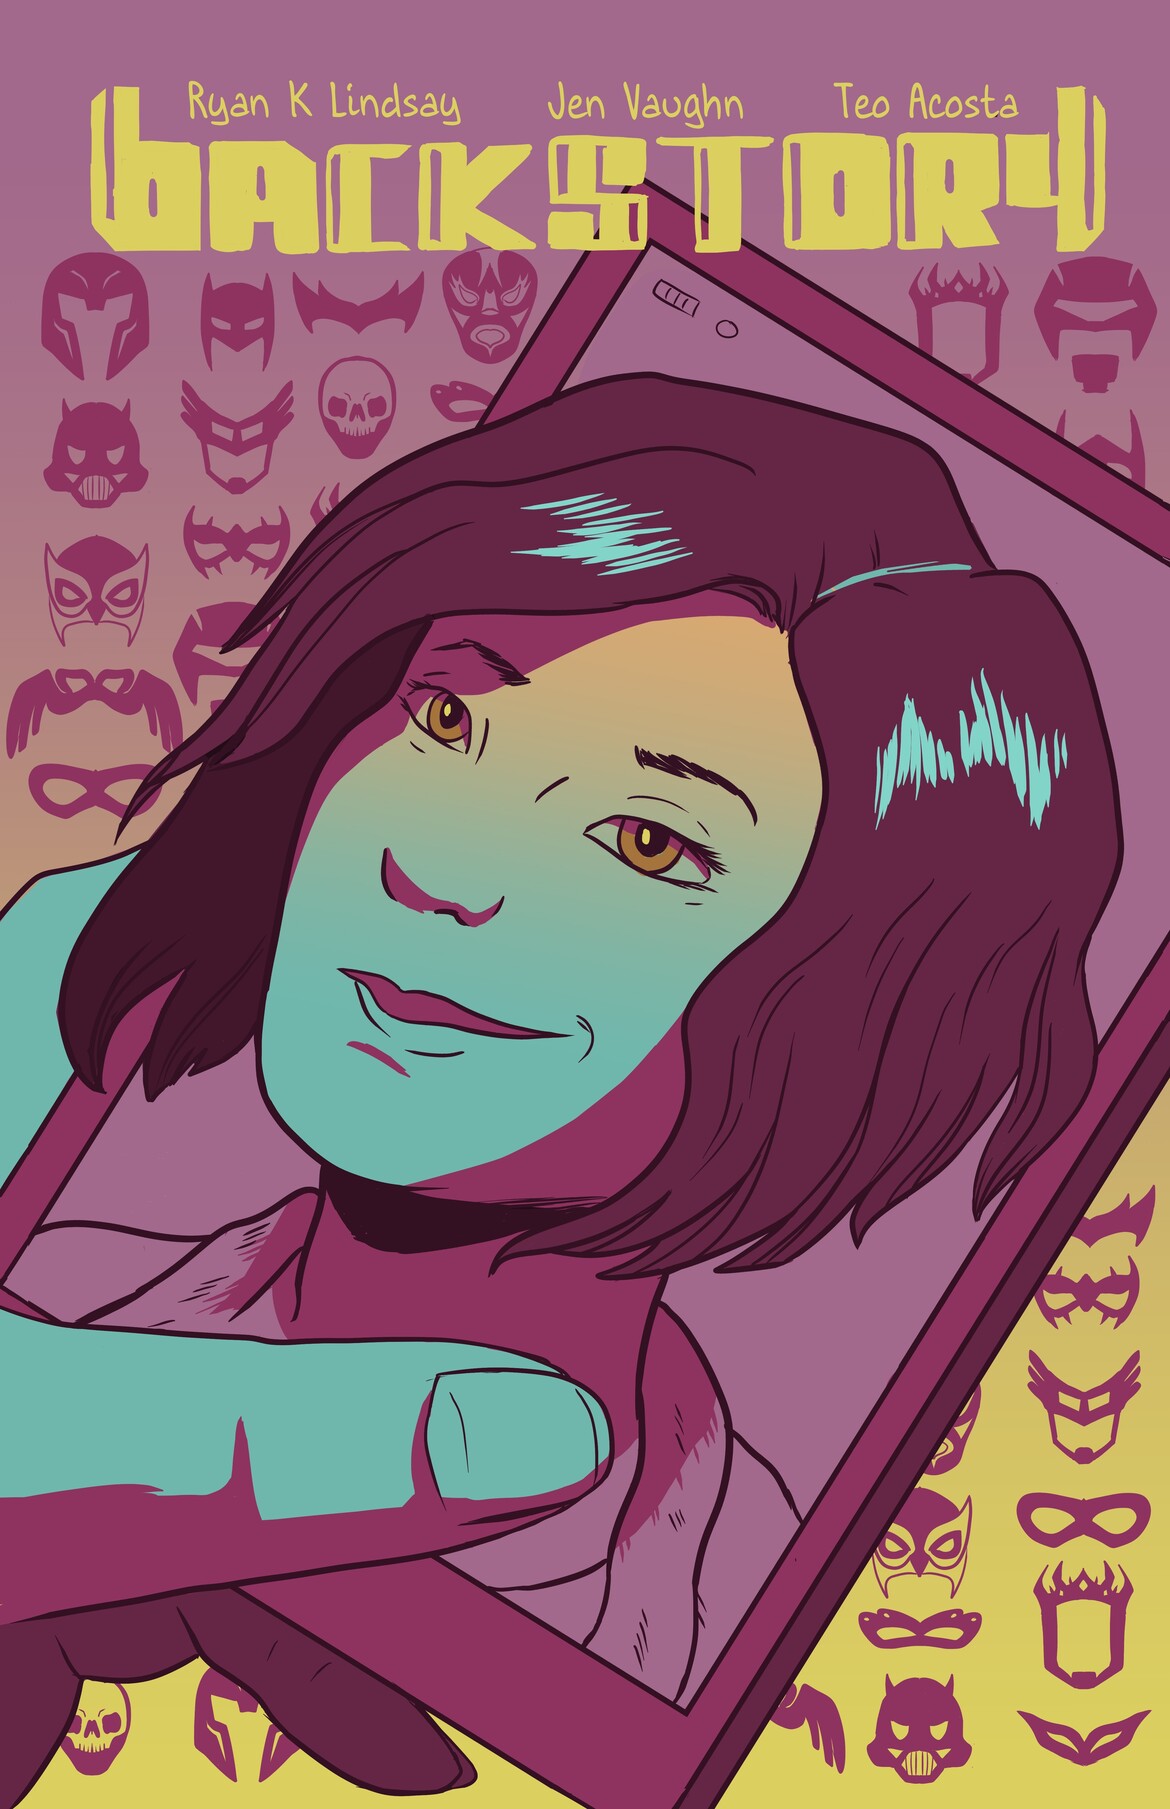 Image of a comic book cover featuring a girl coming out of a cell phone screen with rather chill colors like pink, marigold yellow and teal. The title font on top is Backstory with the creator names Ryan K Lindsay, Jen Vaughn, and Teo Acosta. in the backg